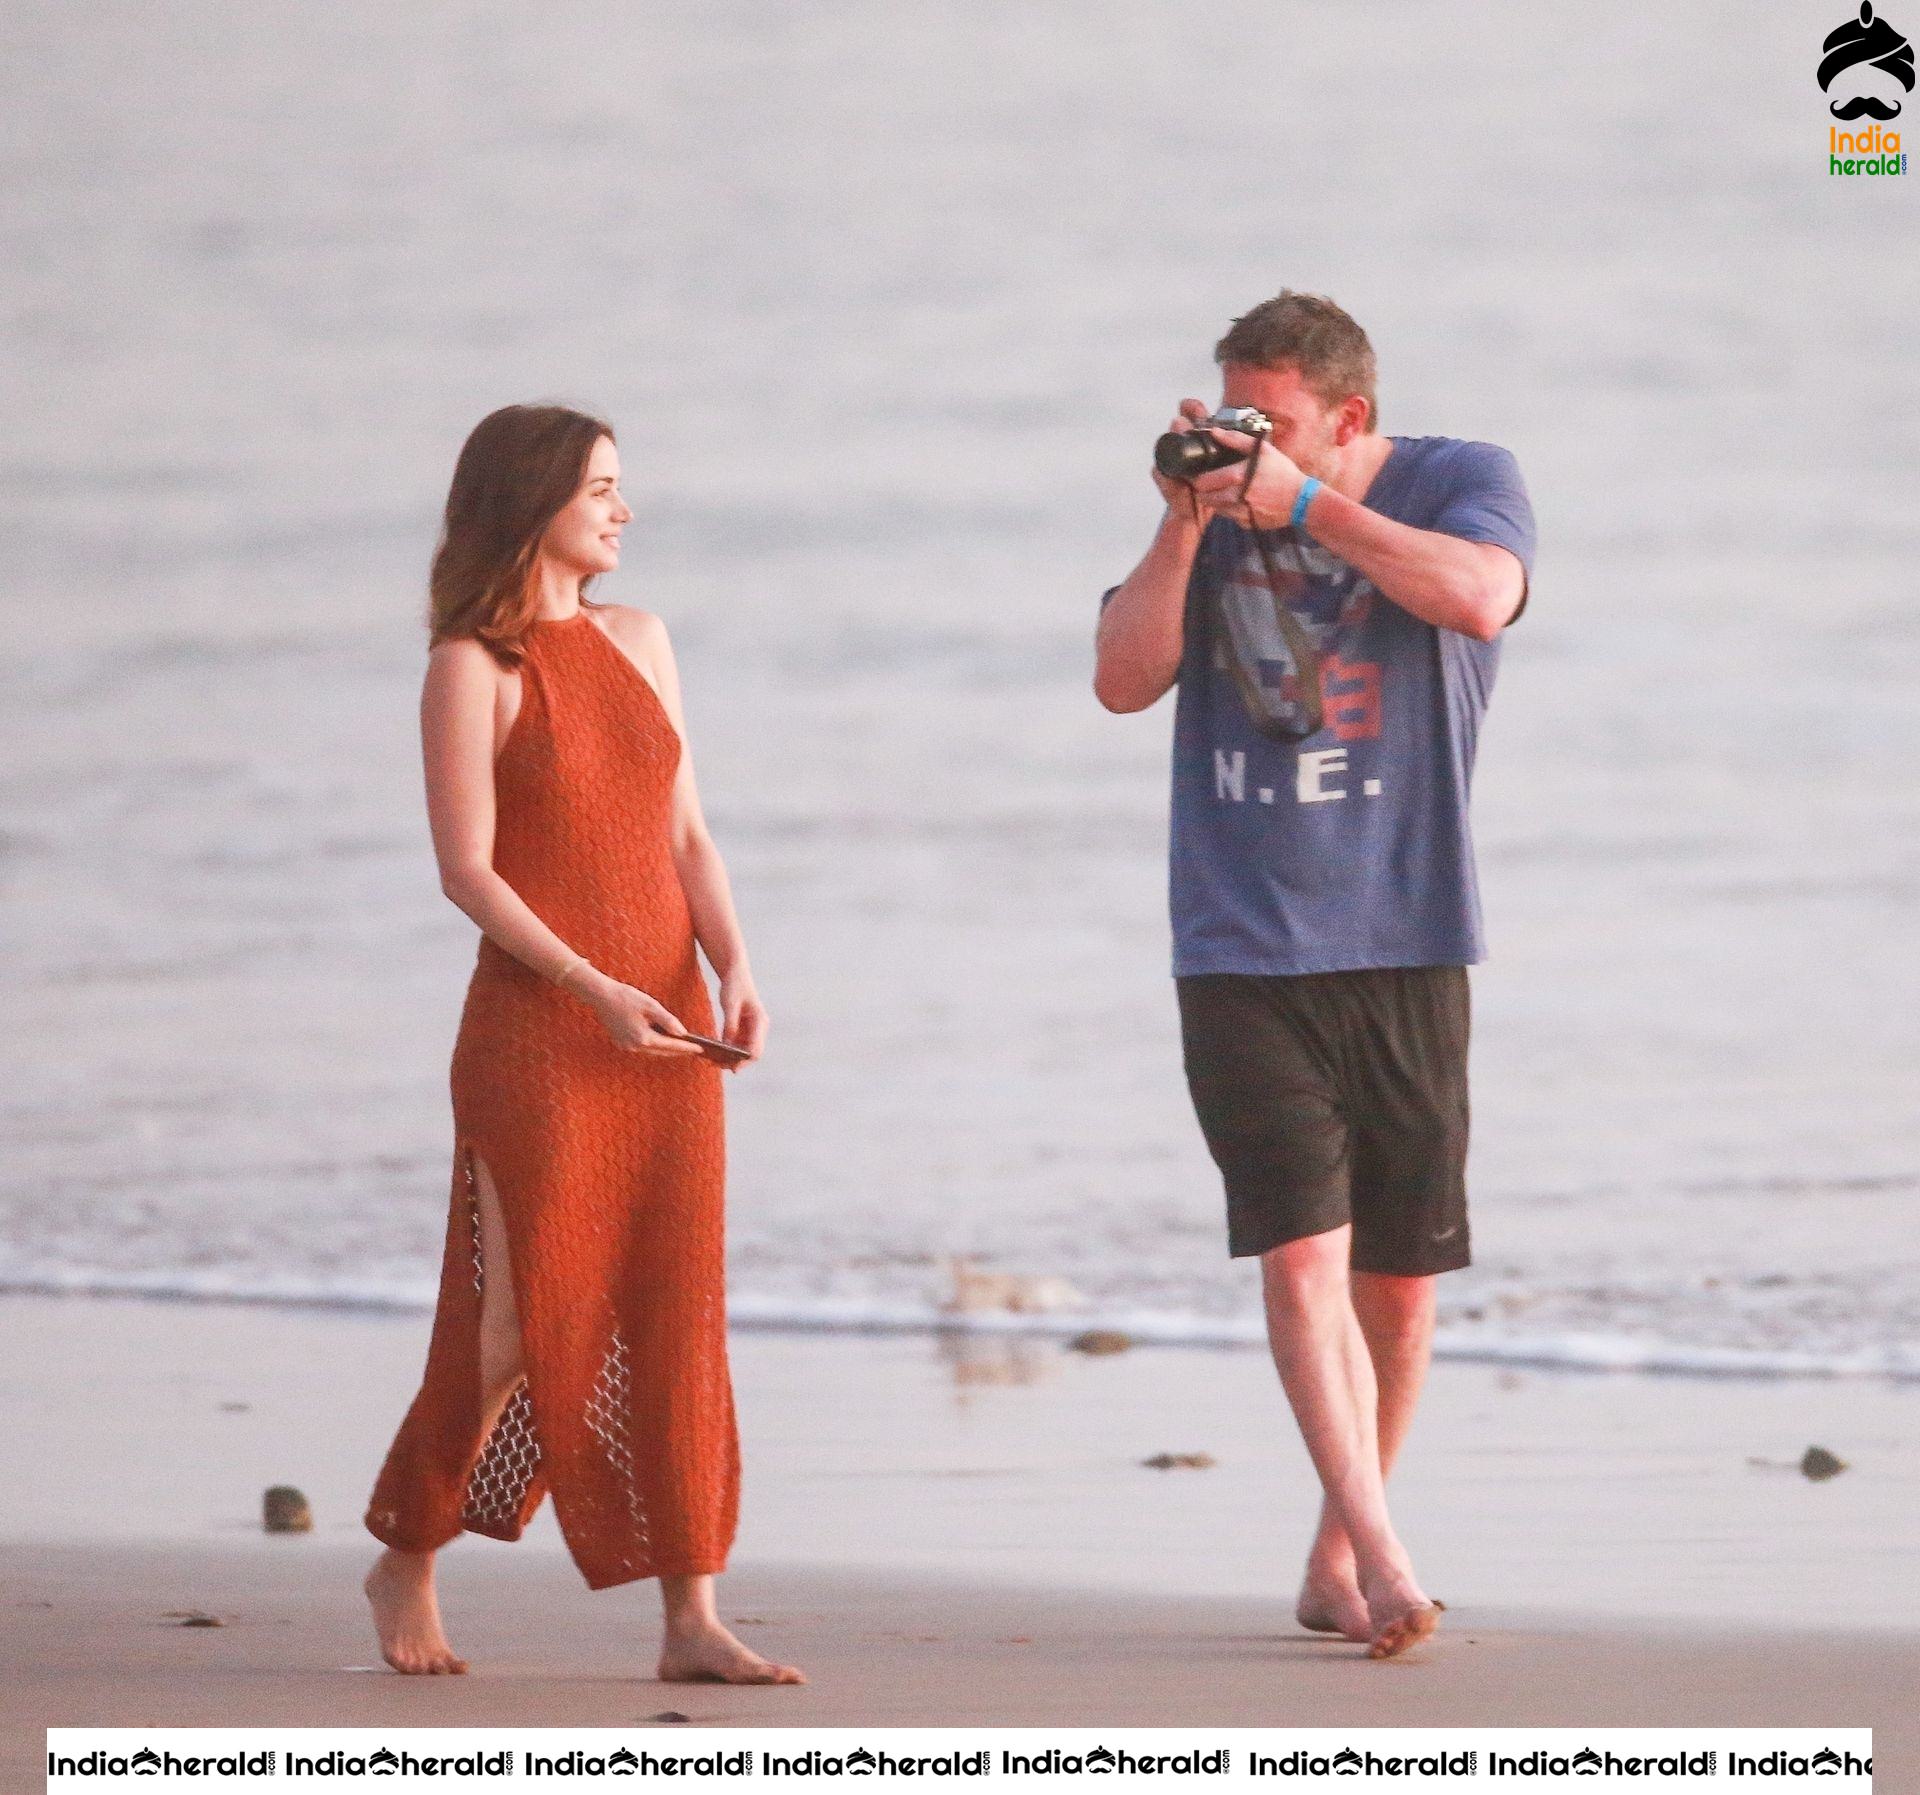 Ana De Armas enjoys a very romantic stroll in Sheer Red dress on the beach in Costa Rica